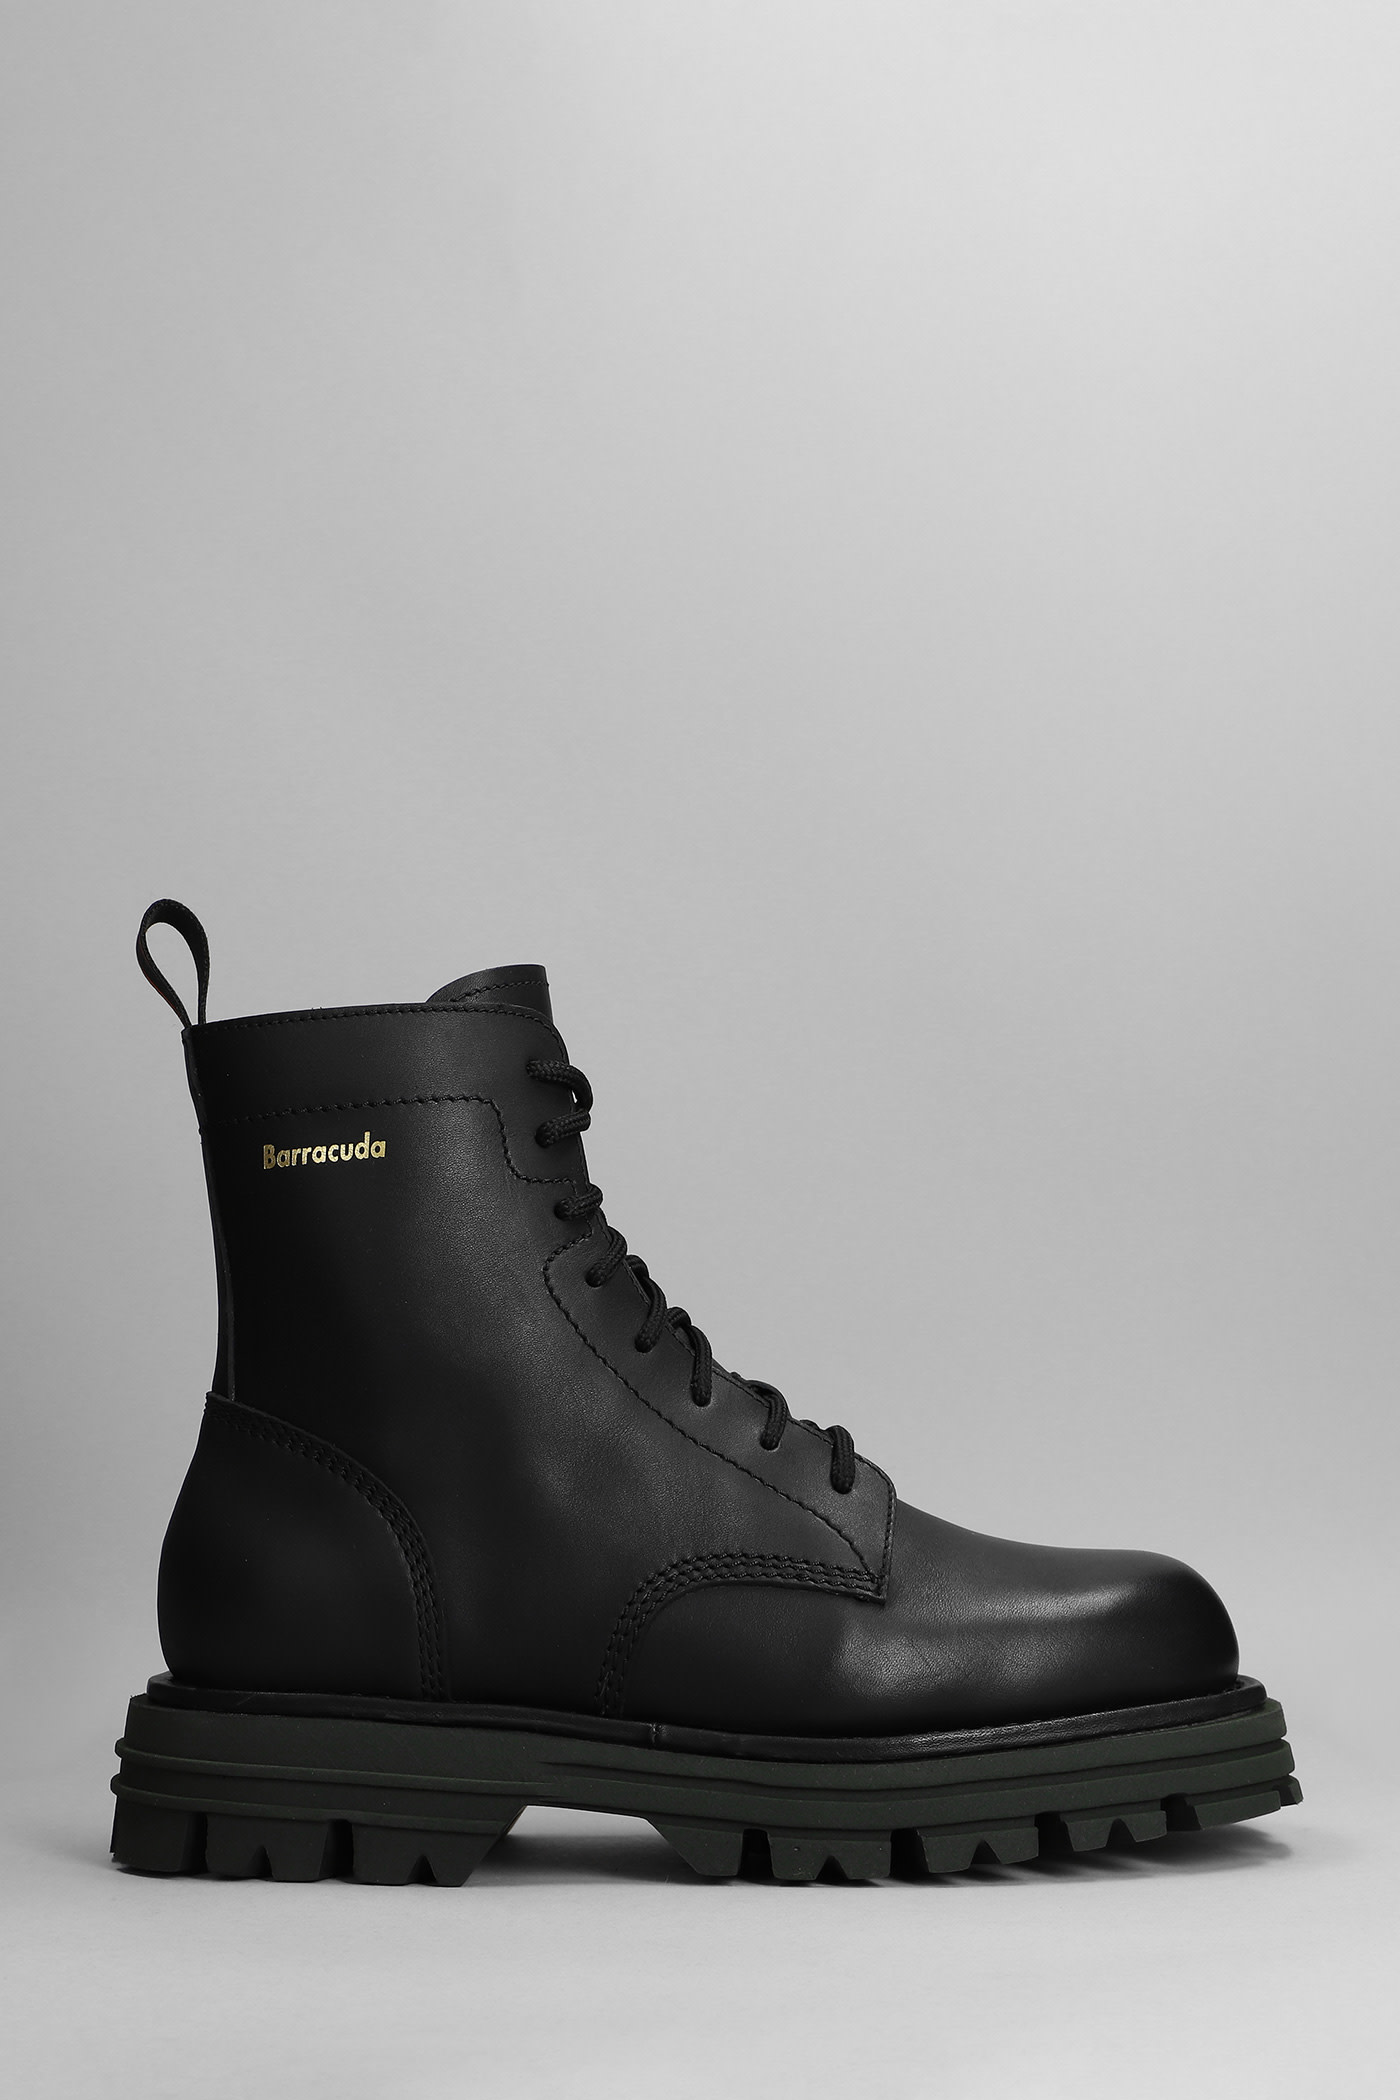 Barracuda Combat Boots In Black Leather